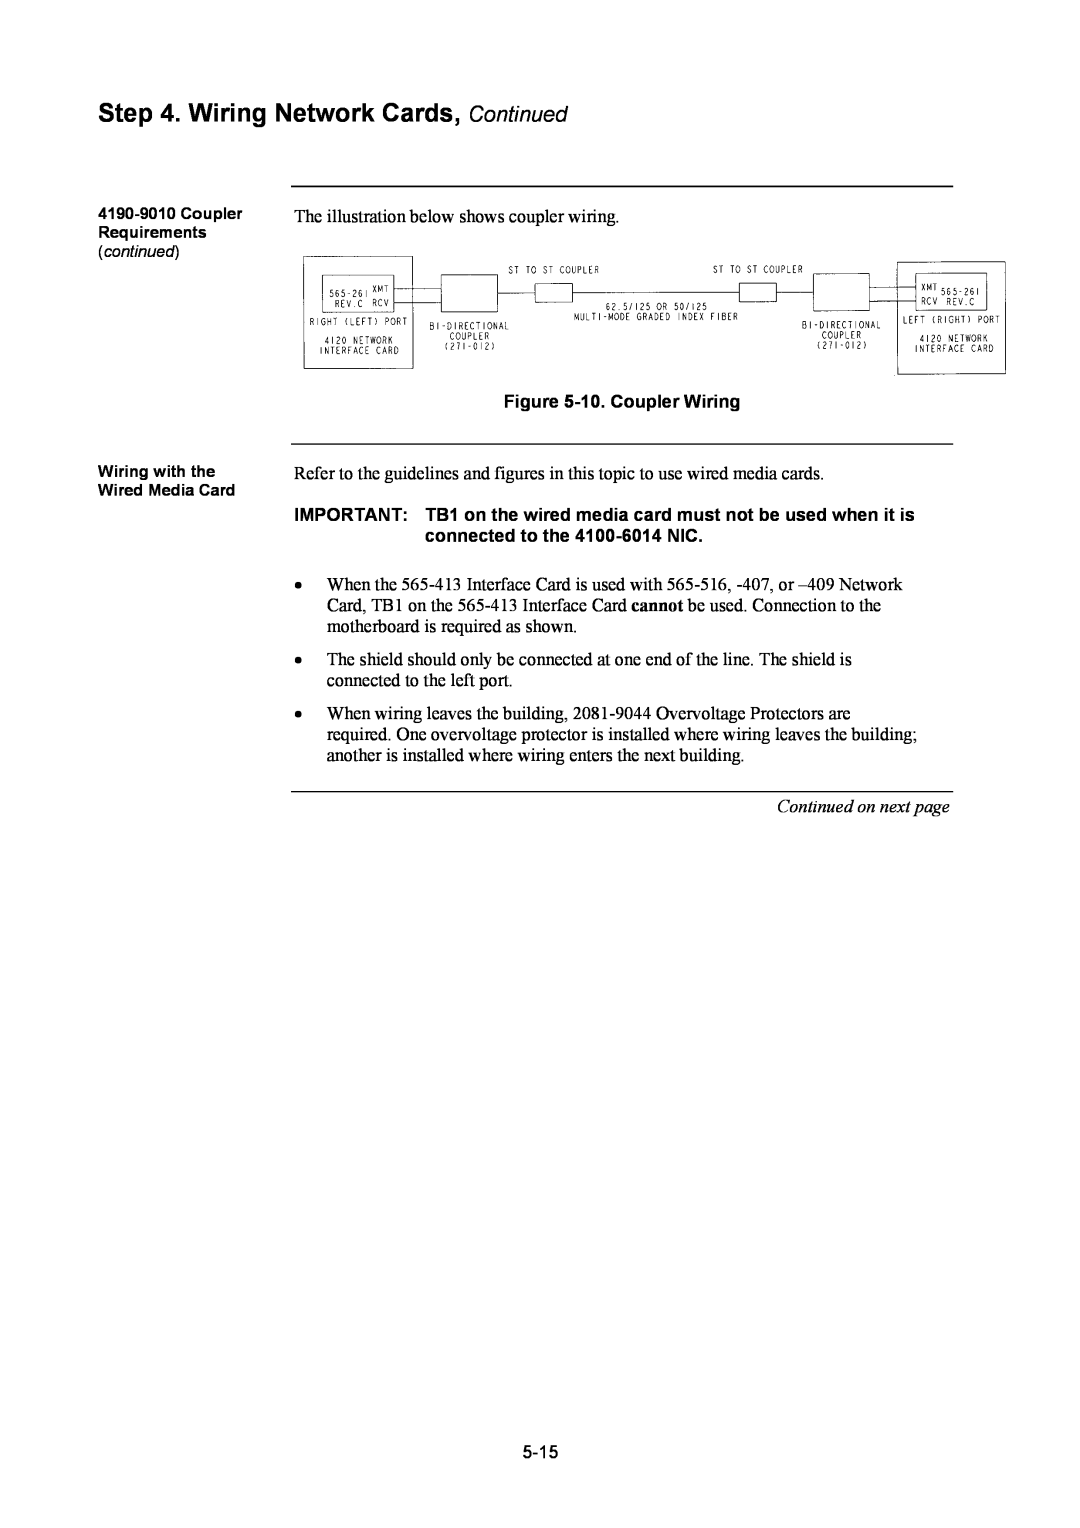 Tyco 4100U Wiring Network Cards, Continued, The illustration below shows coupler wiring, 10.Coupler Wiring 